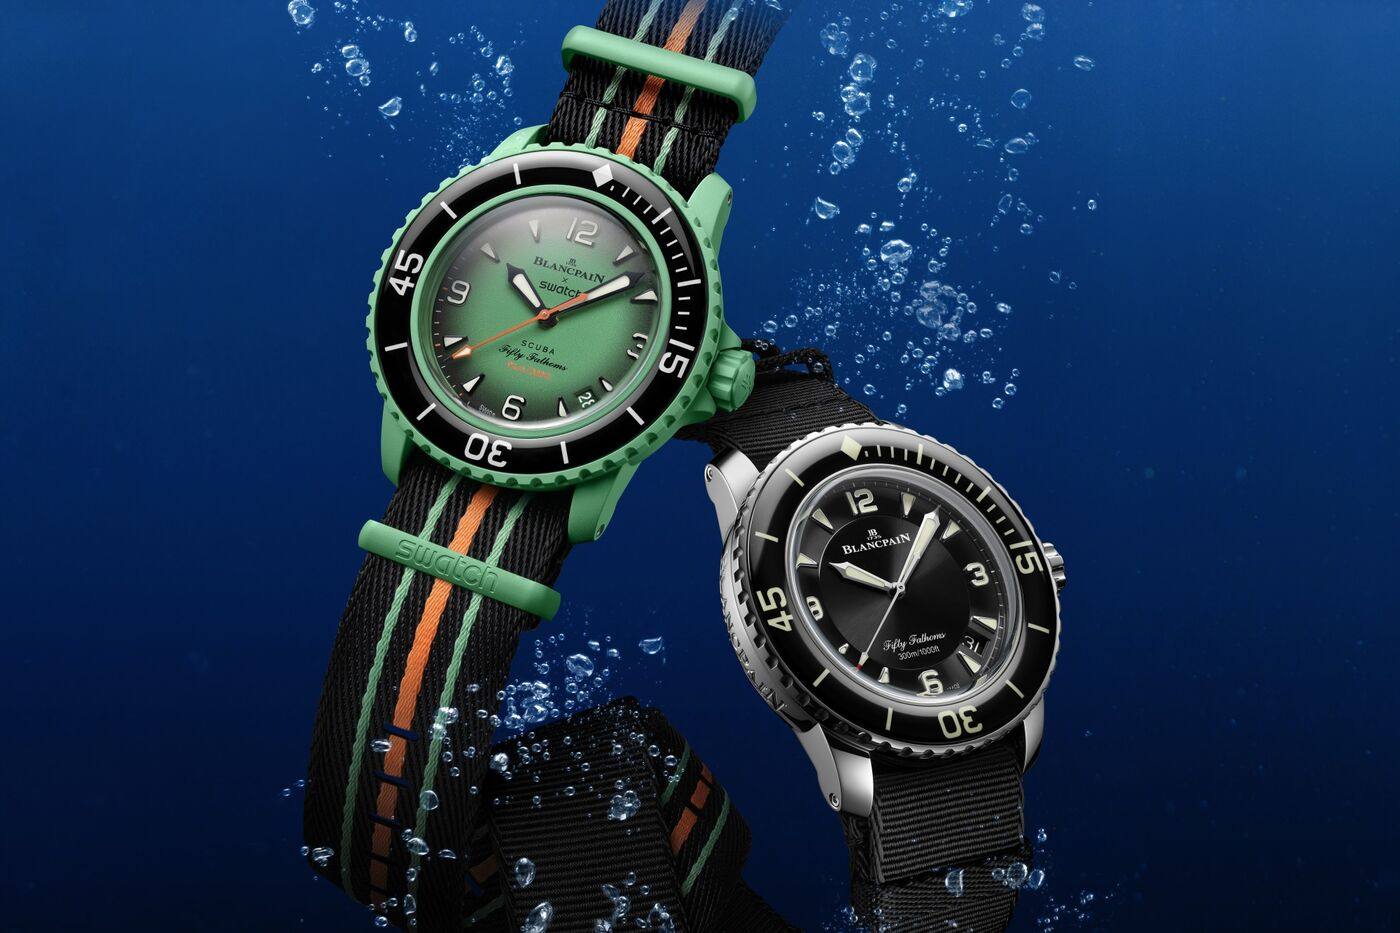 Swatch honours the legendary Blancpain Fifty Fathoms with five models made from bioceramic material, powered by its Sistem51 mechanical movement and water resistant down to 91 metres. Photo: @blancpain1735/Instagram